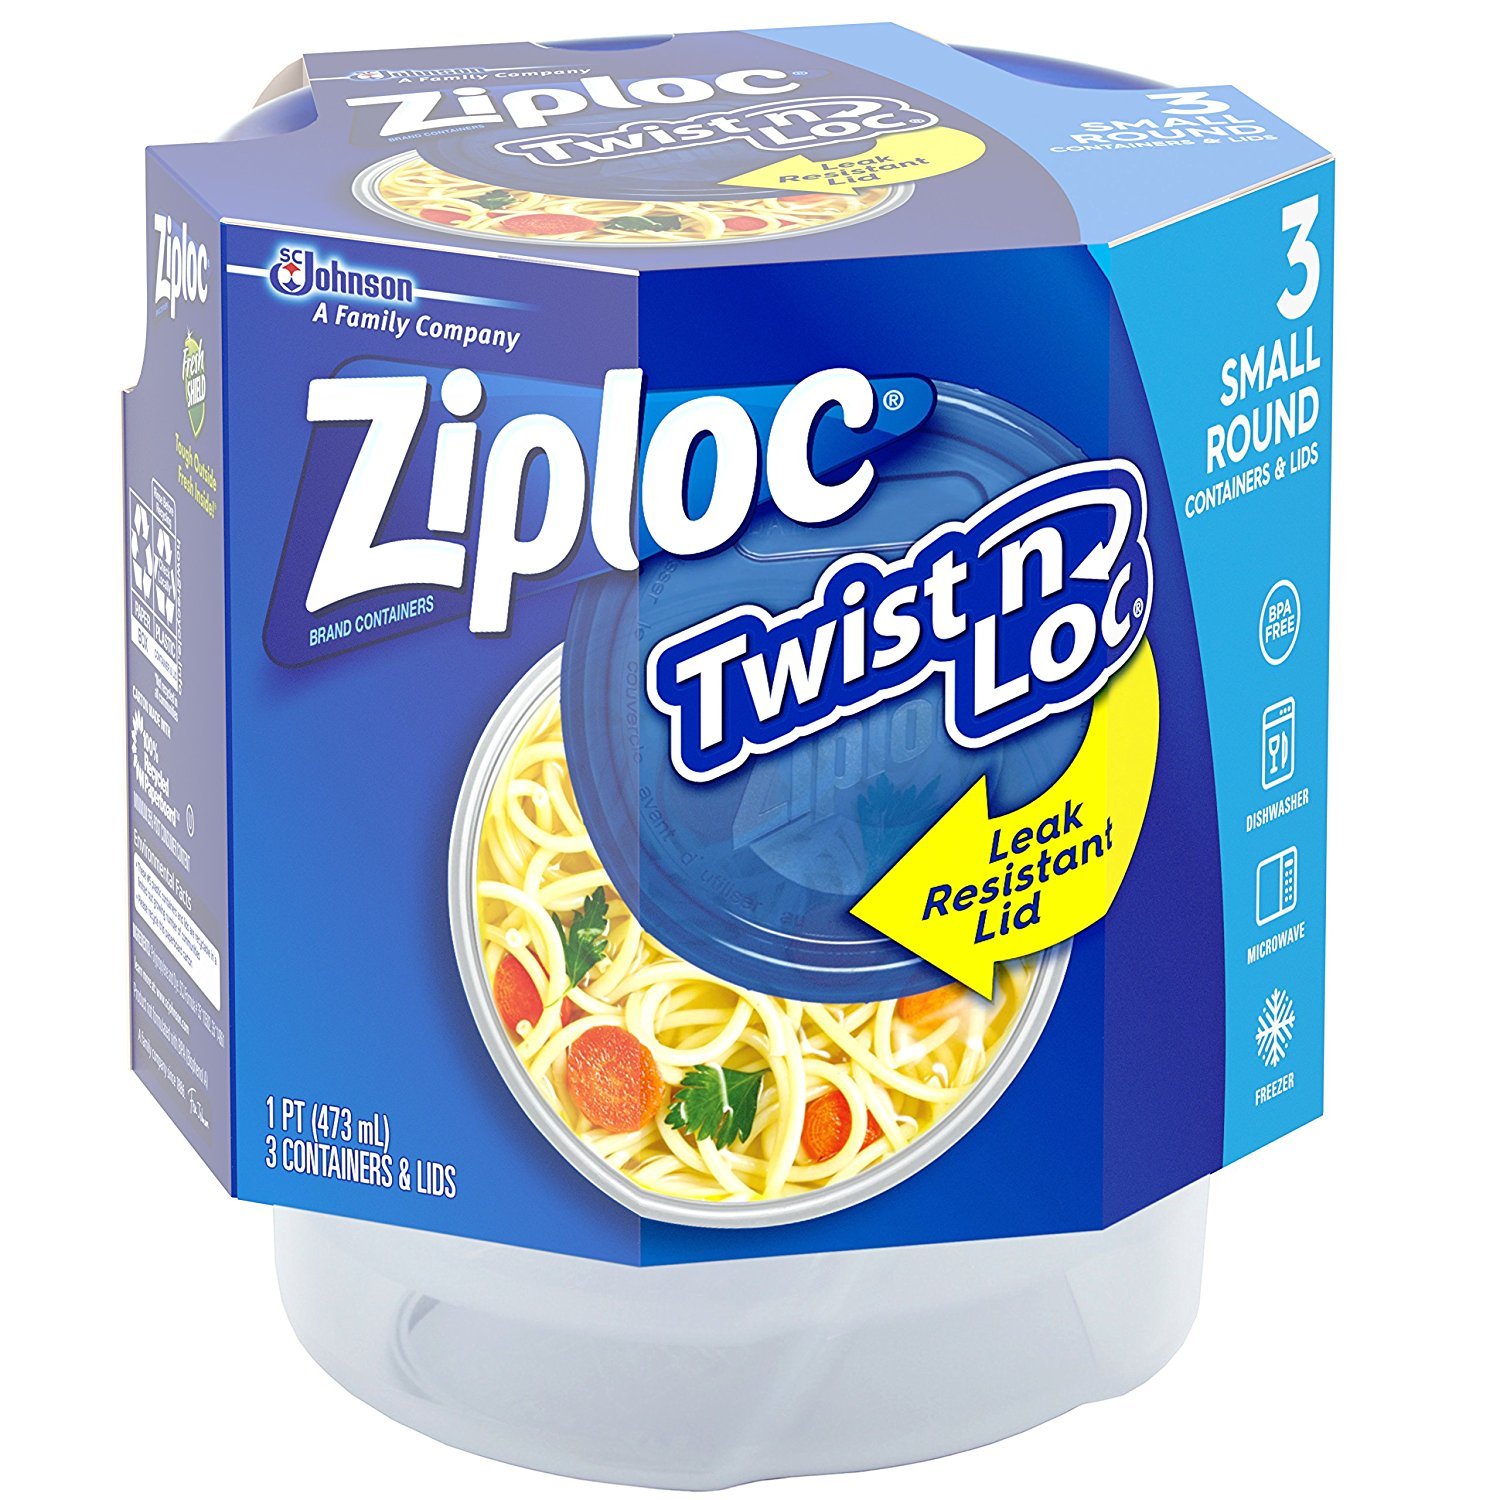 Ziploc® Twist 'n Loc® Small Round Food Storage Containers with Lids, Set of 3 - image 3 of 10